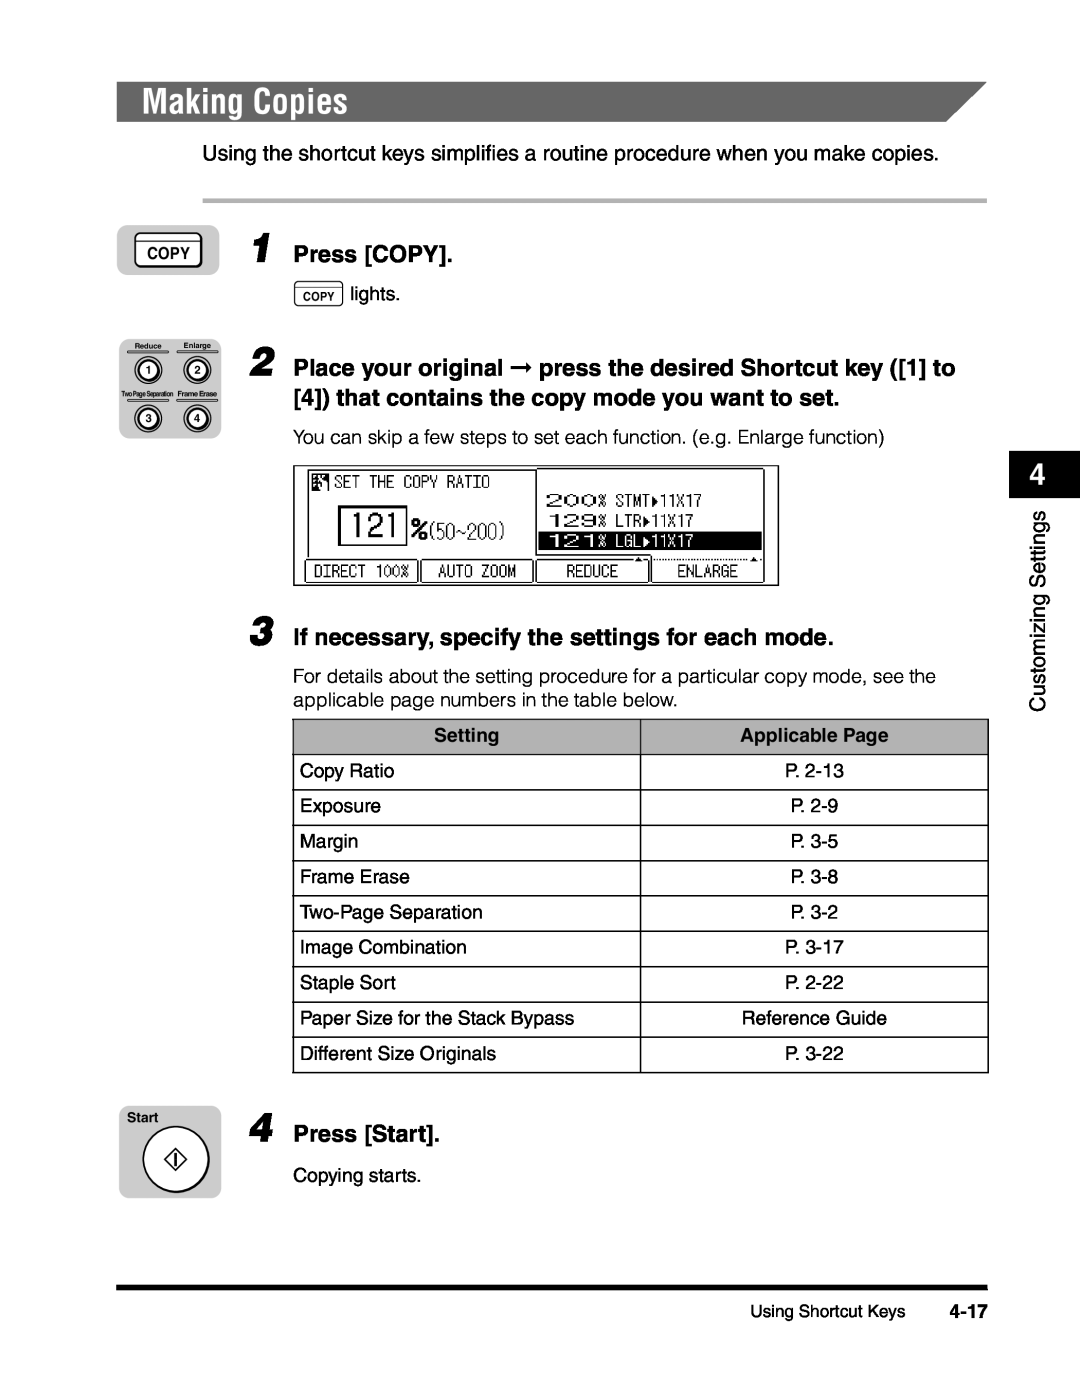 Canon 2010F Making Copies, that contains the copy mode you want to set, If necessary, specify the settings for each mode 